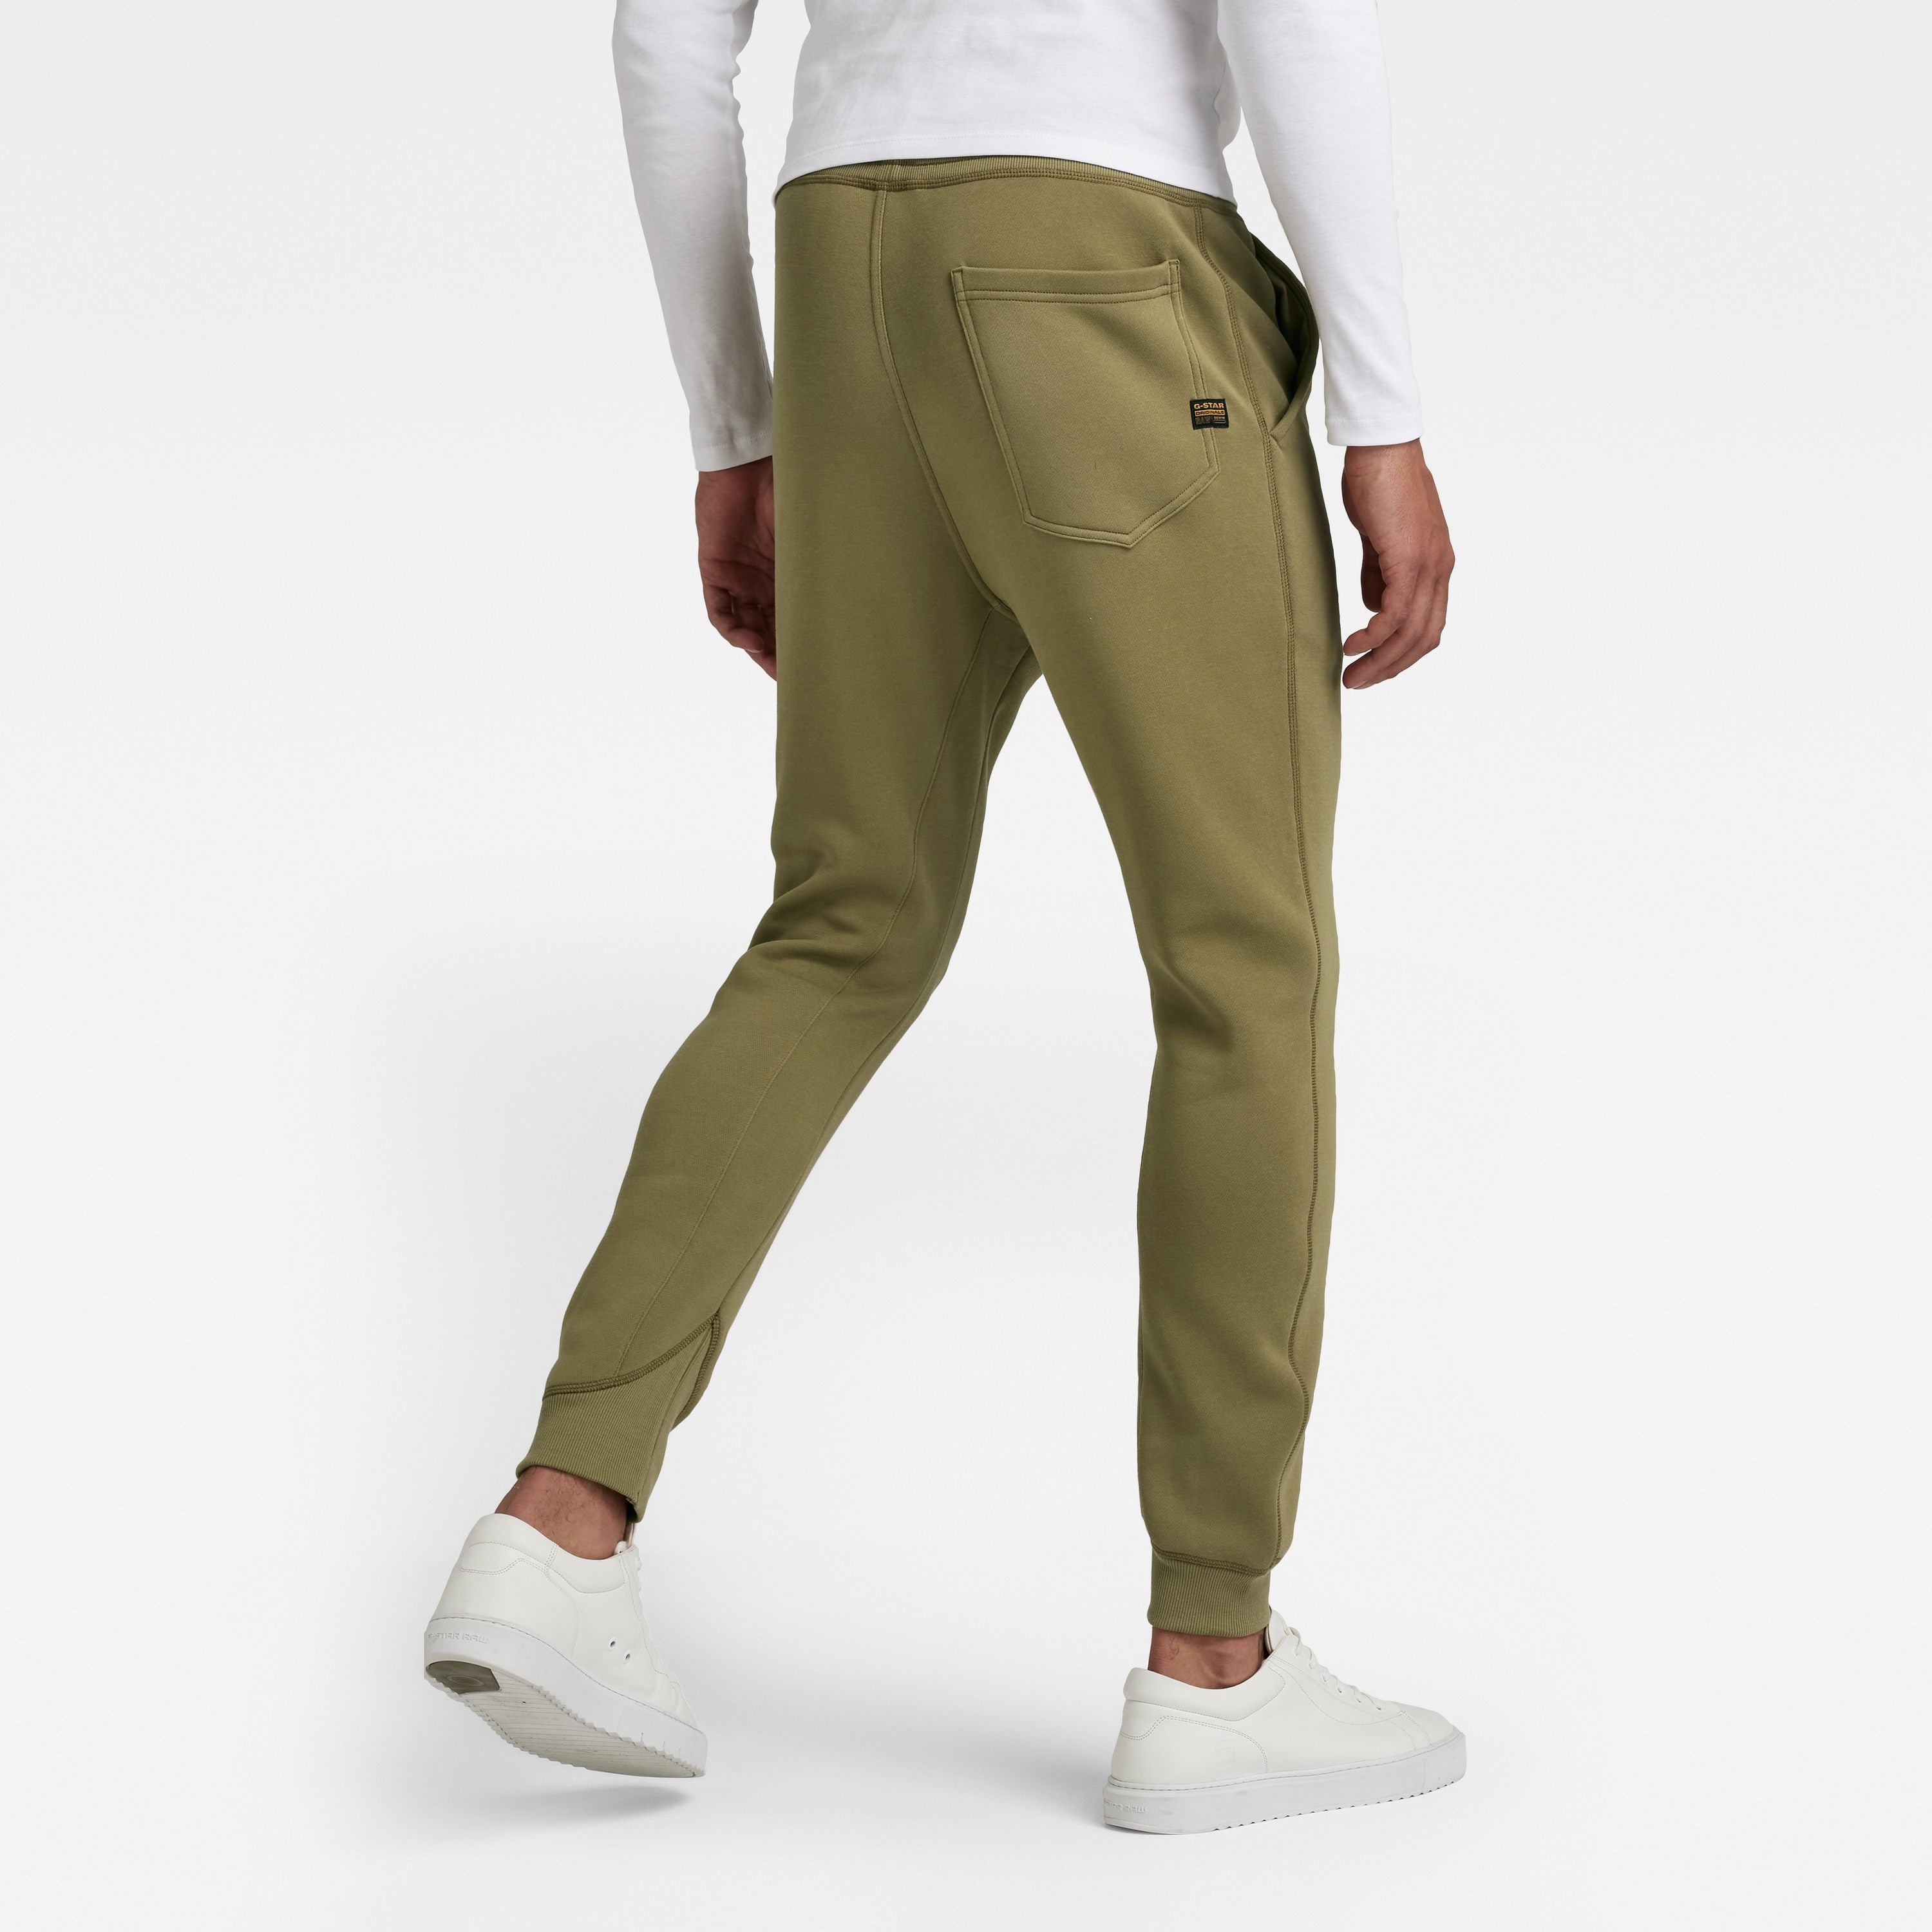 G-Star RAW Bearing 3d Cargo – trousers – shop at Booztlet